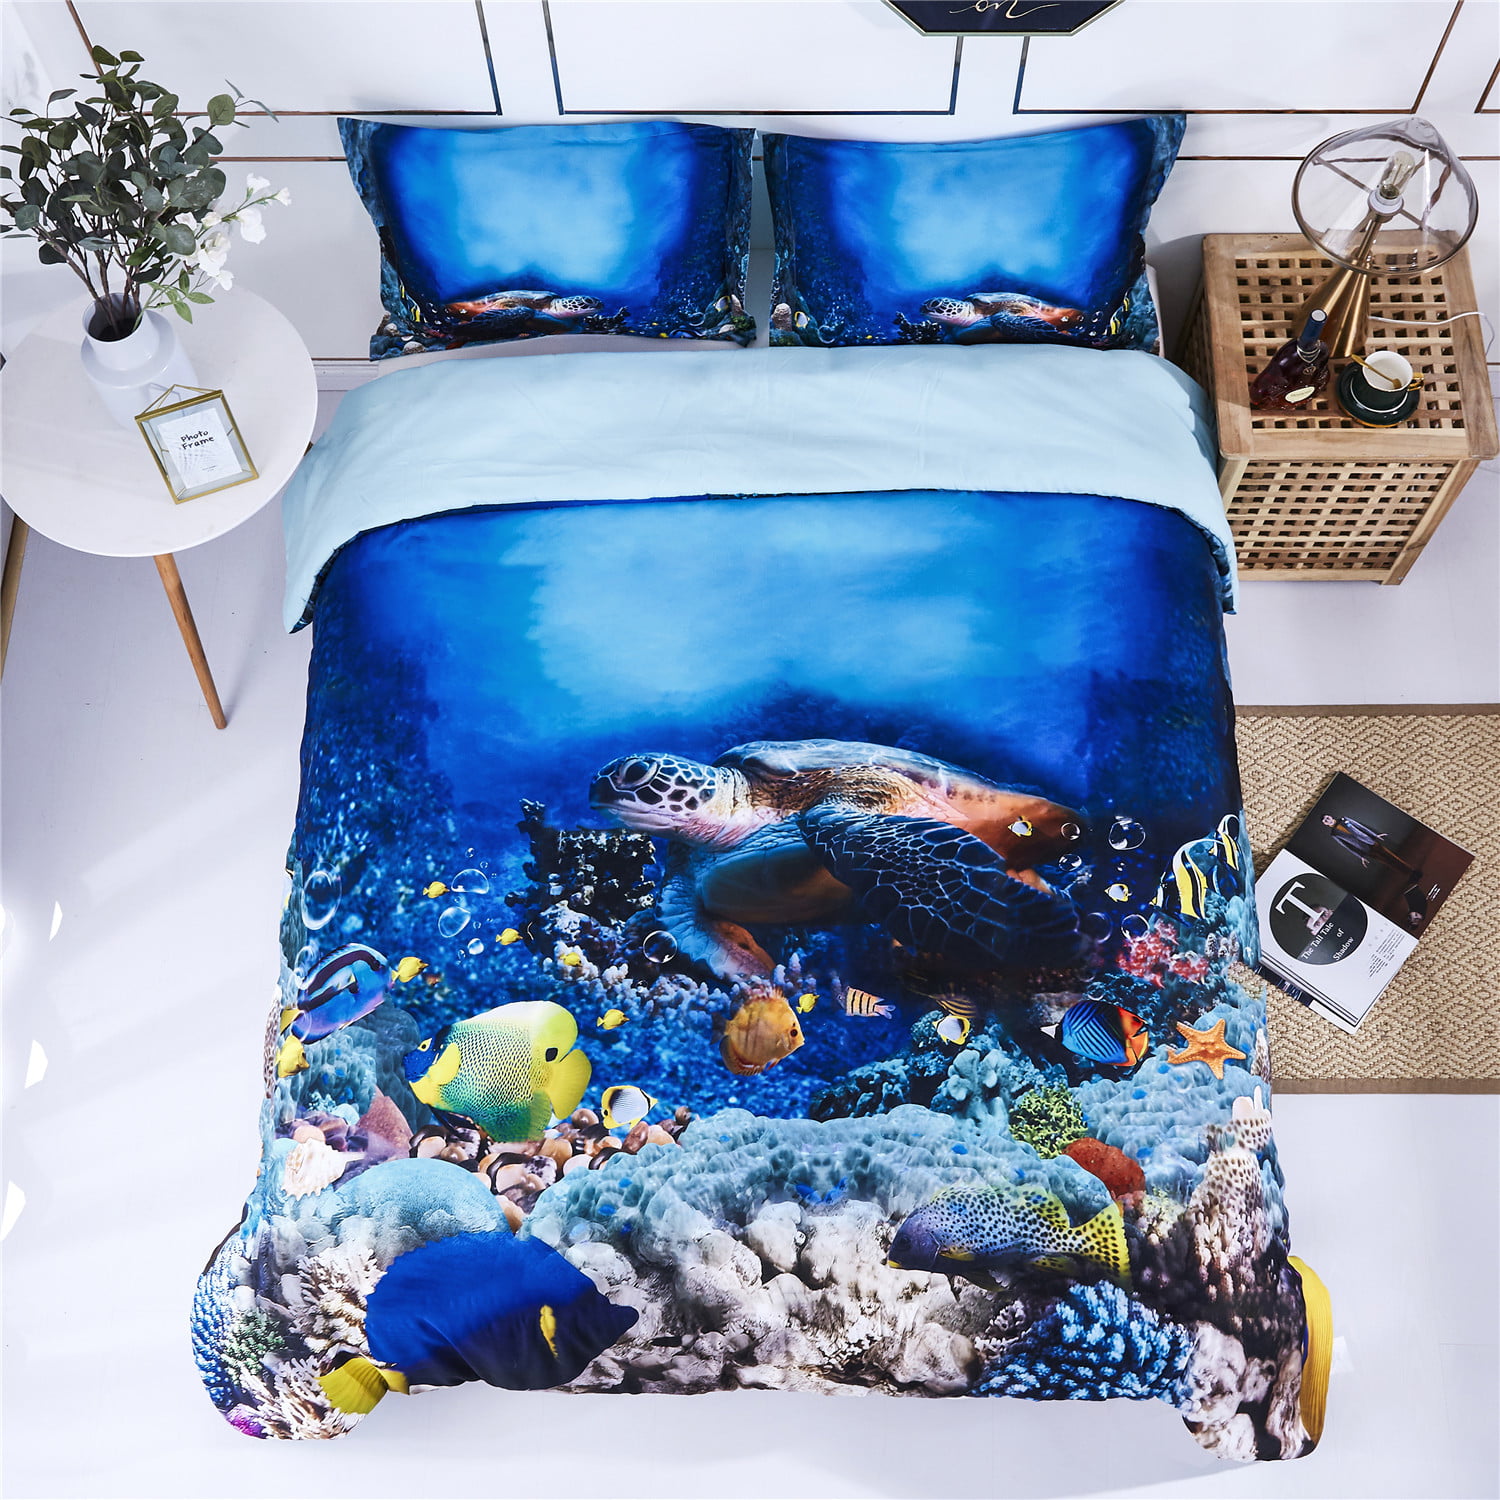 3D Blue Sea Tortoise Printed Comforter with Pillowcases for Children Qucover Twin Size Comforter Bedding Sets